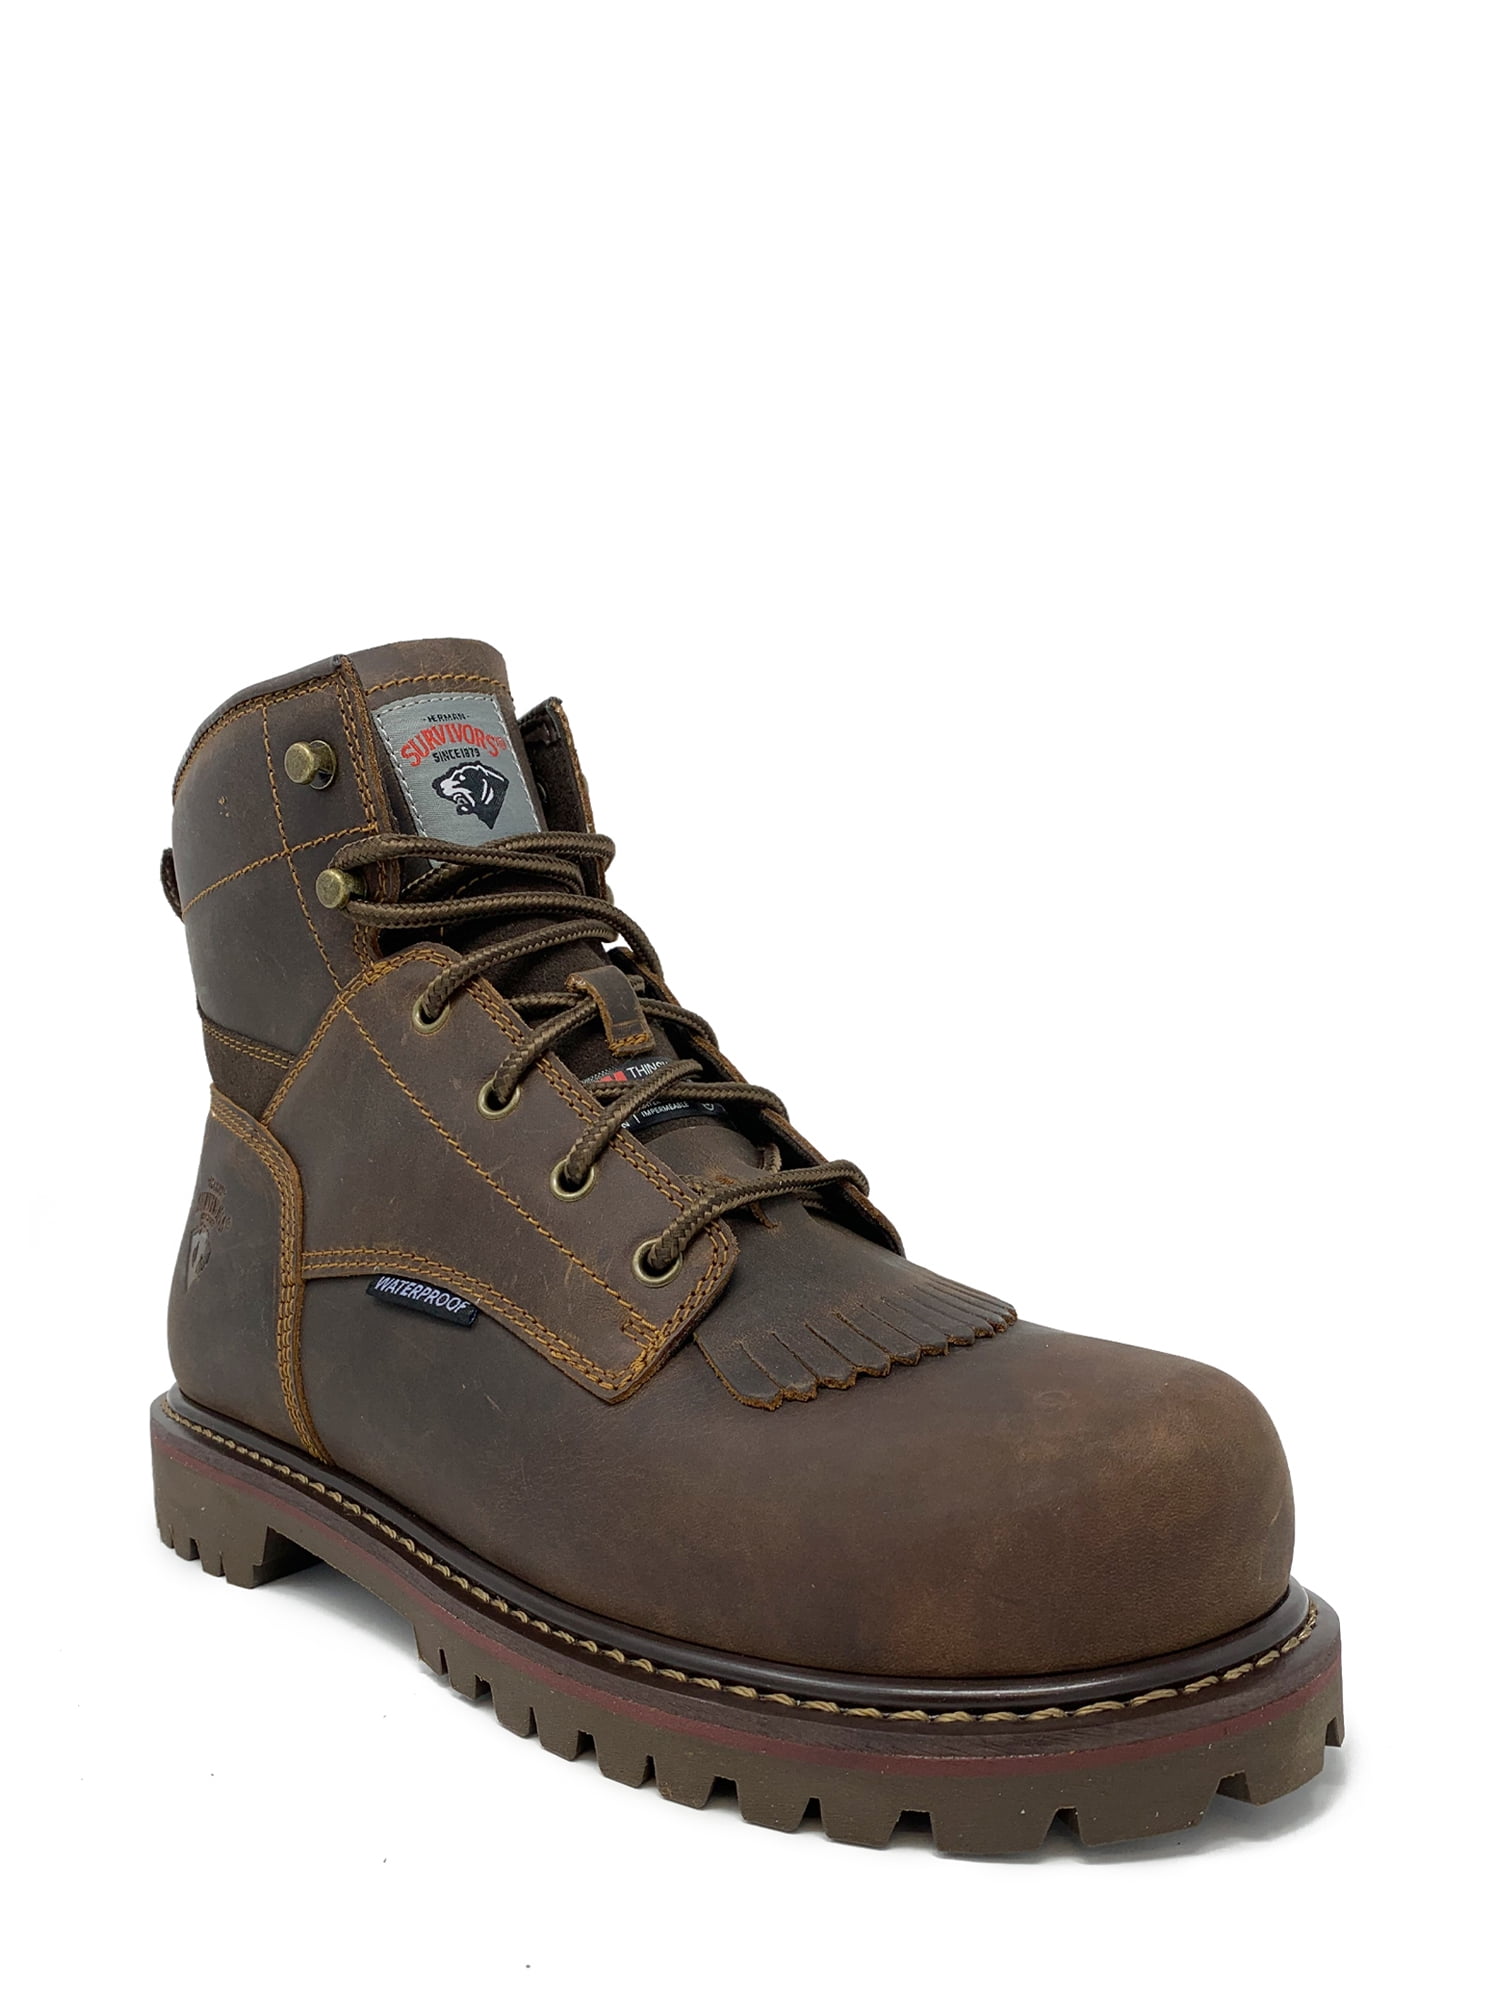 MCRAE INDUSTRIAL 6" LACE-UP WORK BOOTS MR46133 SALE ALL SIZES 